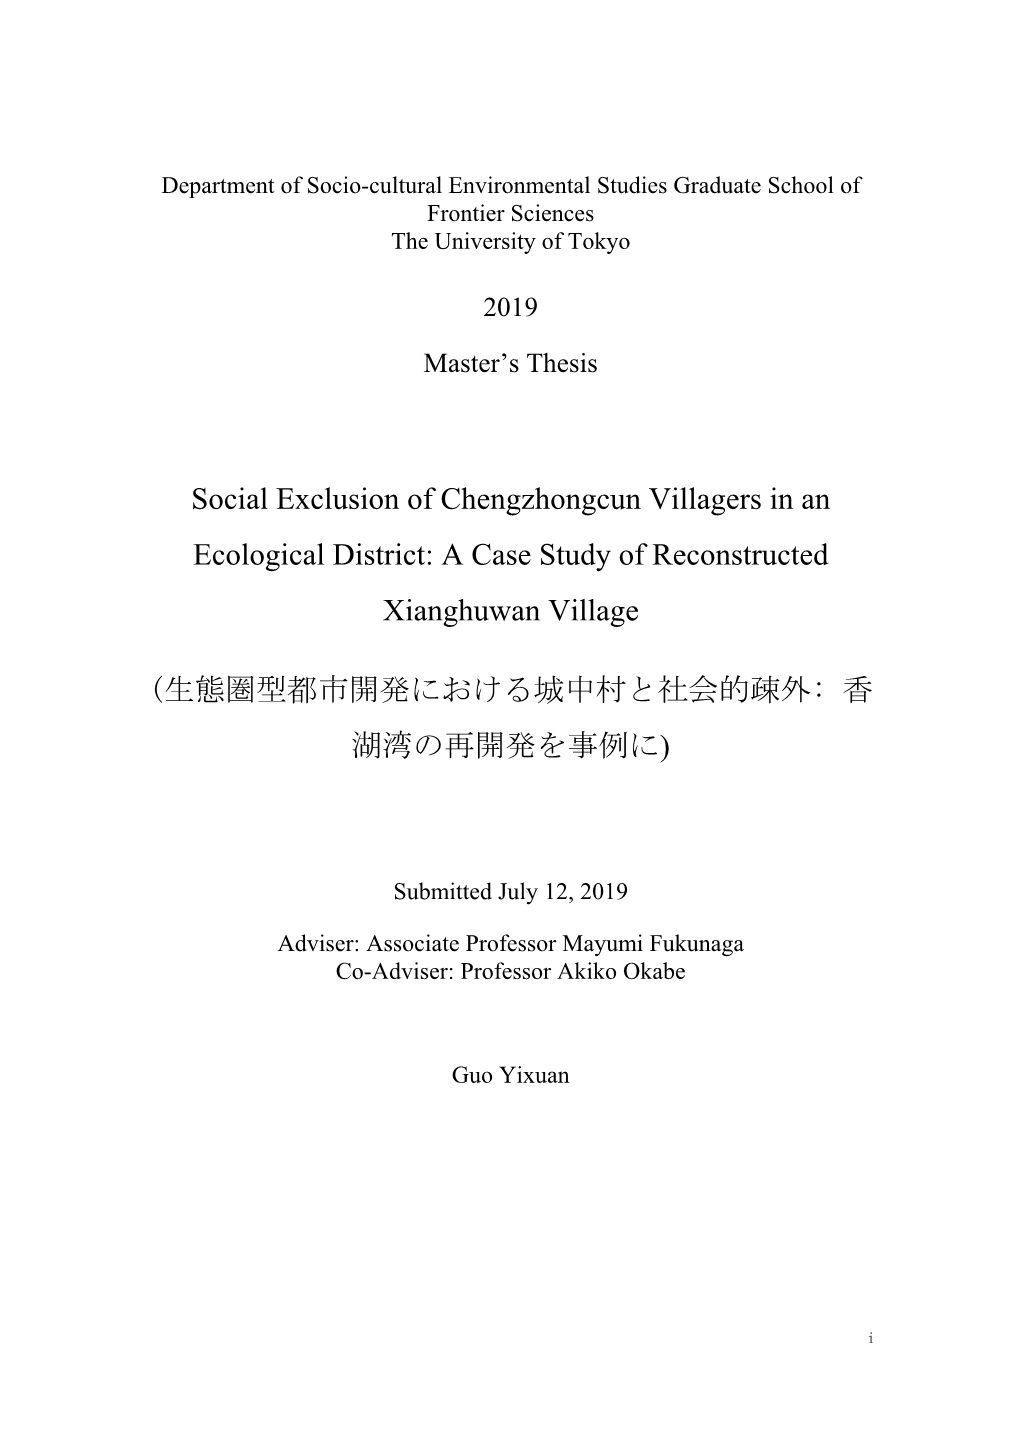 Social Exclusion of Chengzhongcun Villagers in an Ecological District: a Case Study of Reconstructed Xianghuwan Village